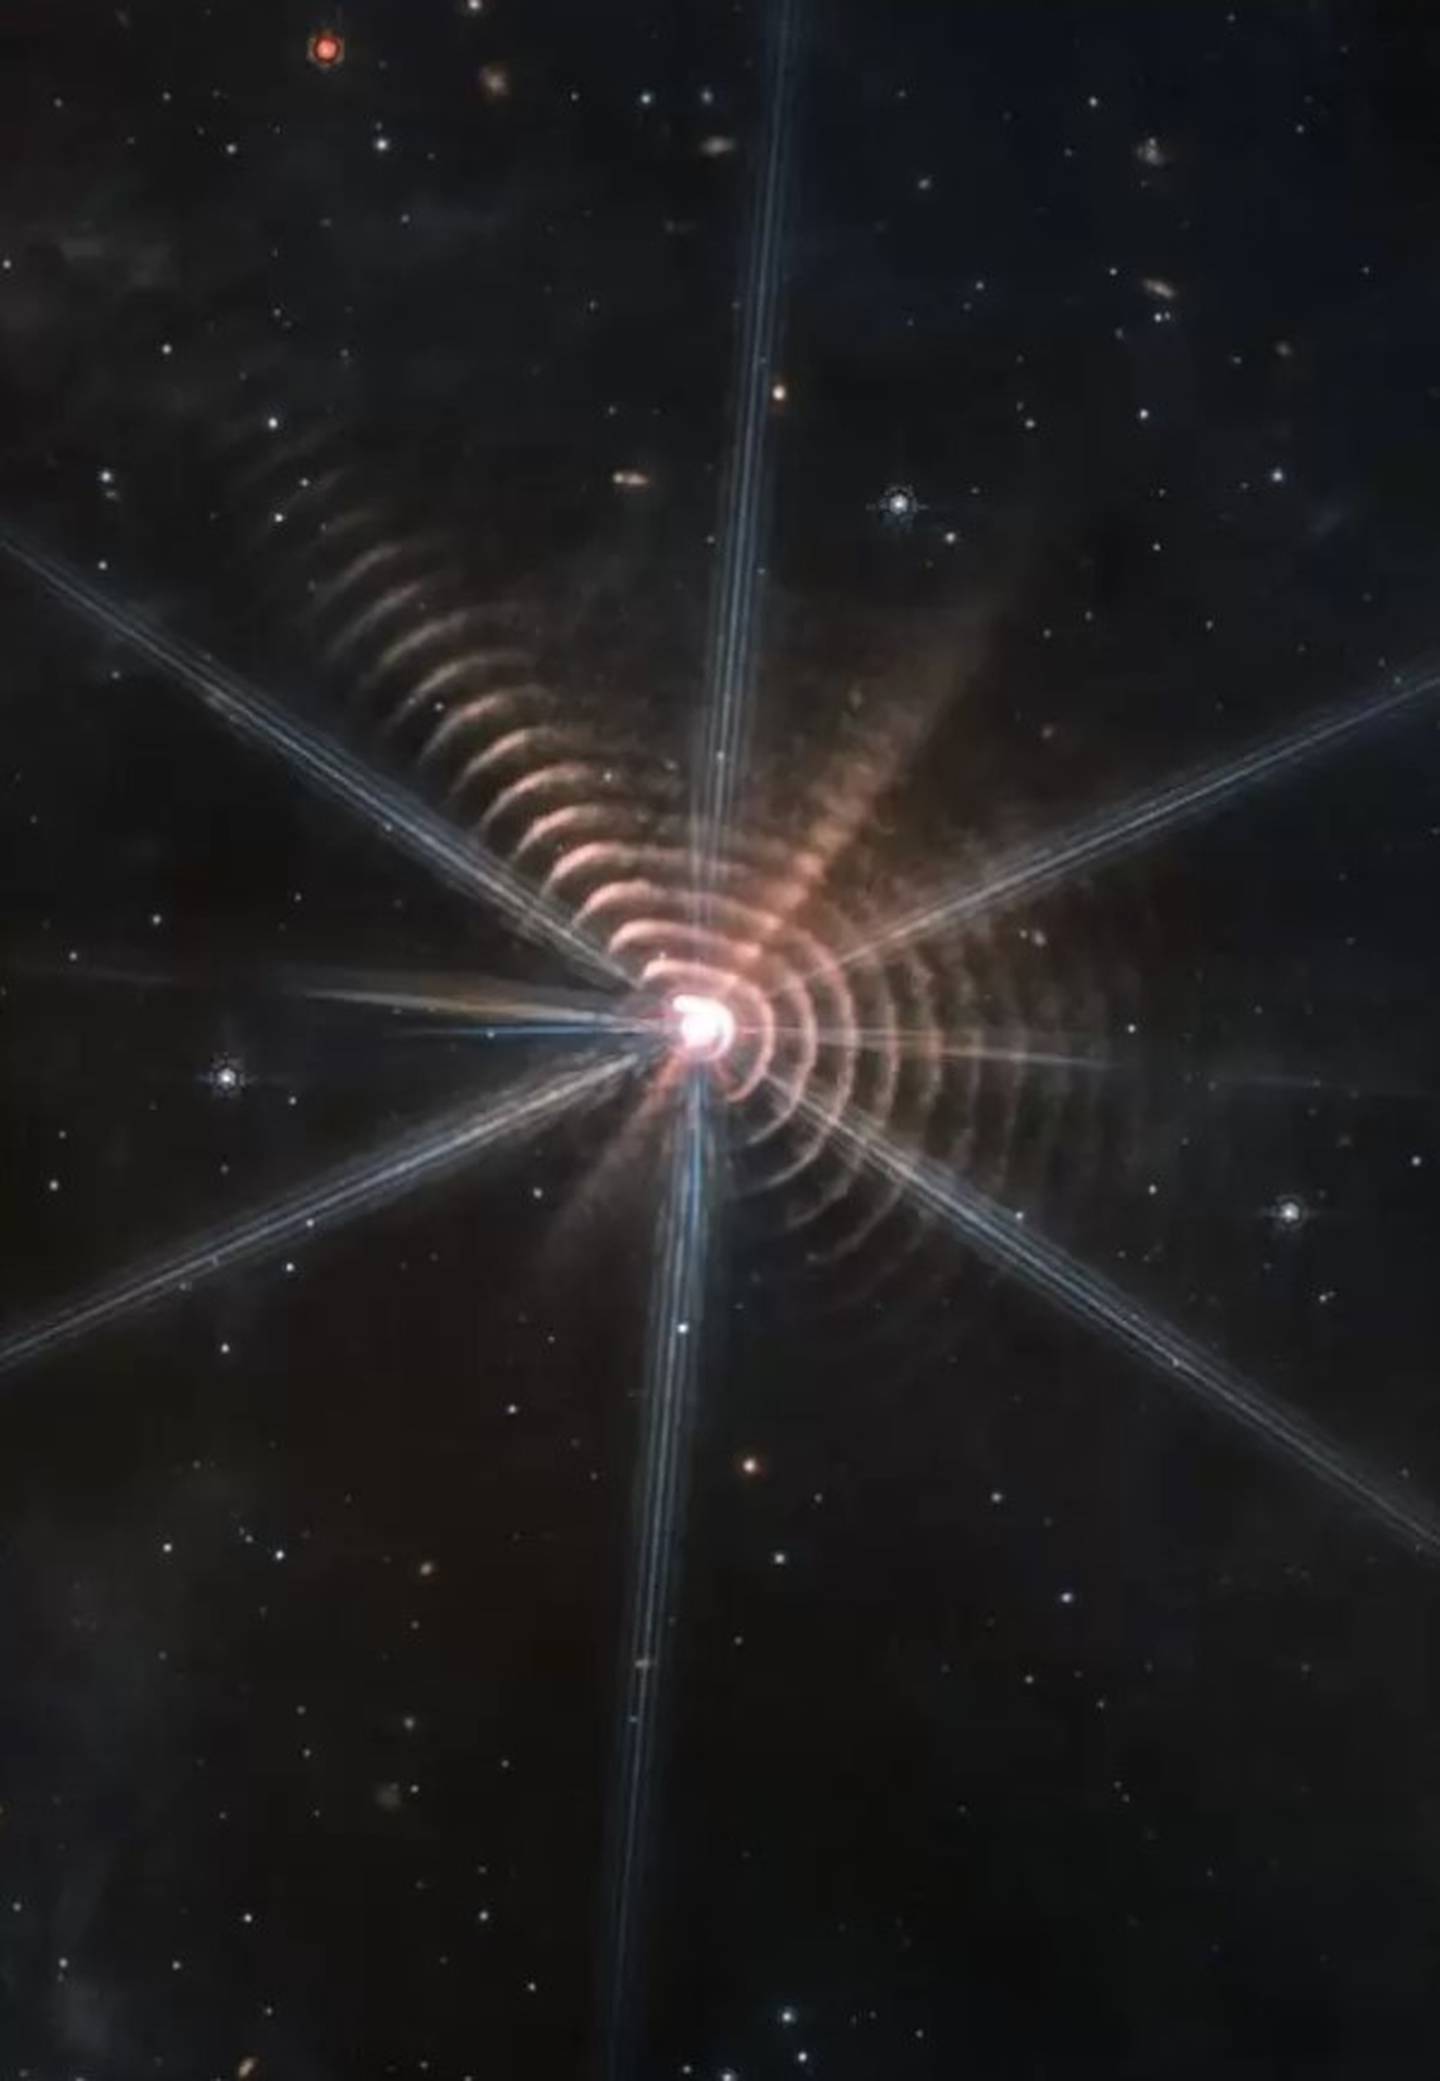 Phenomenon of two stars that look like one